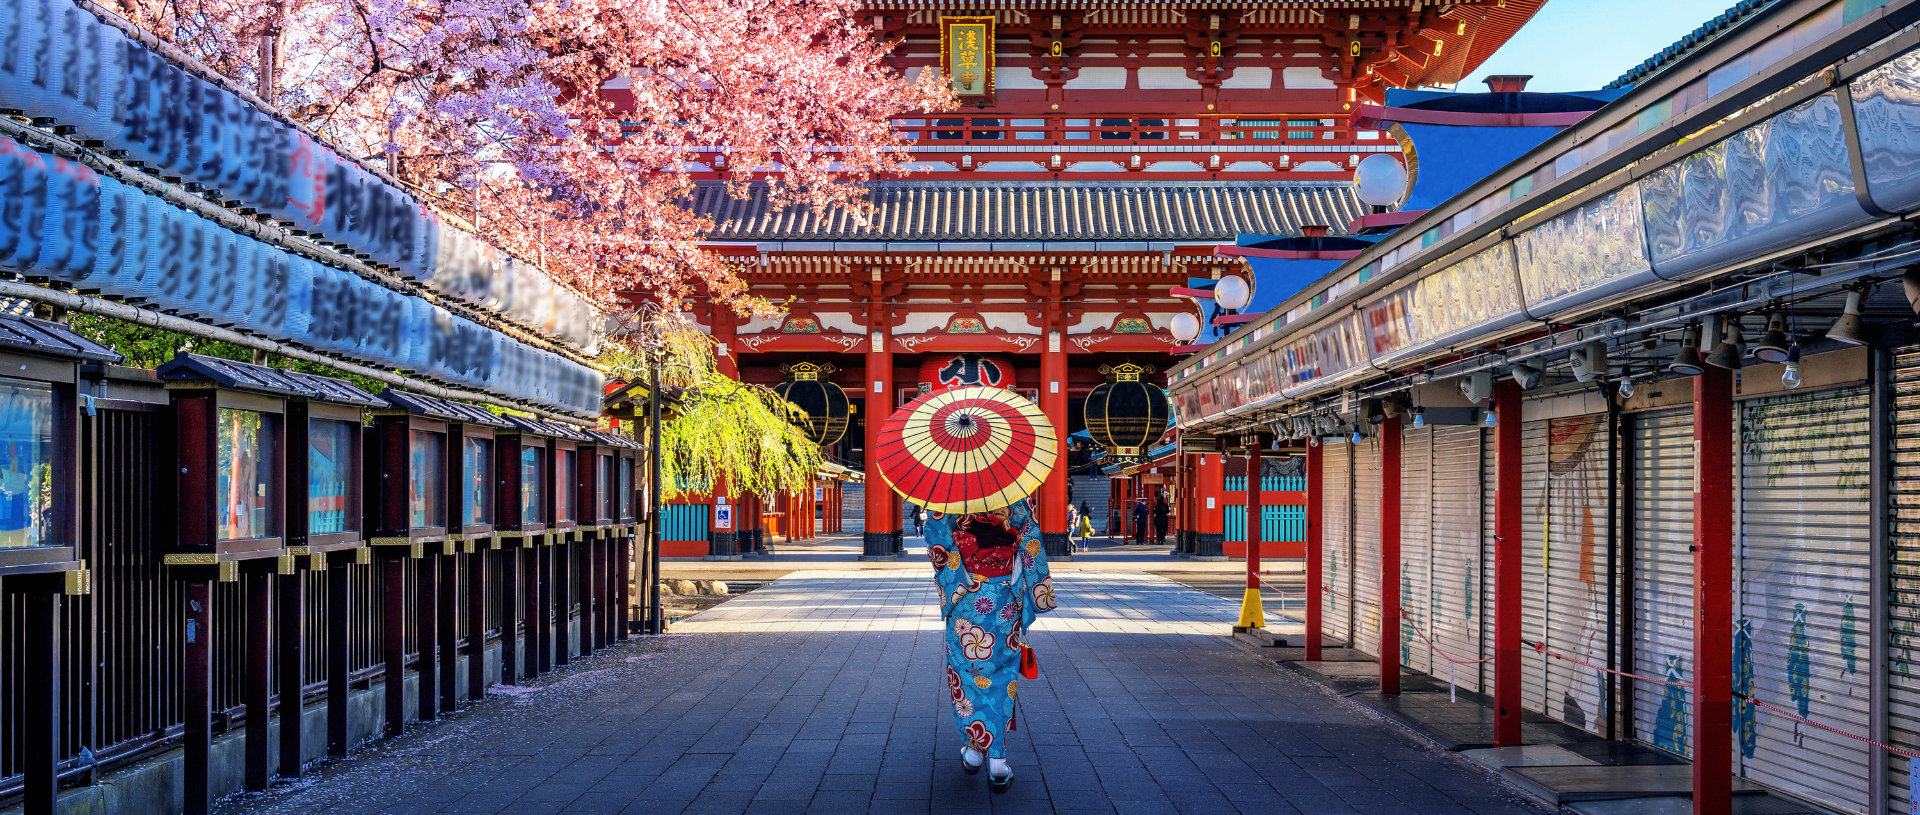 japanese-woman-walking-to-temple-cherry-blossom